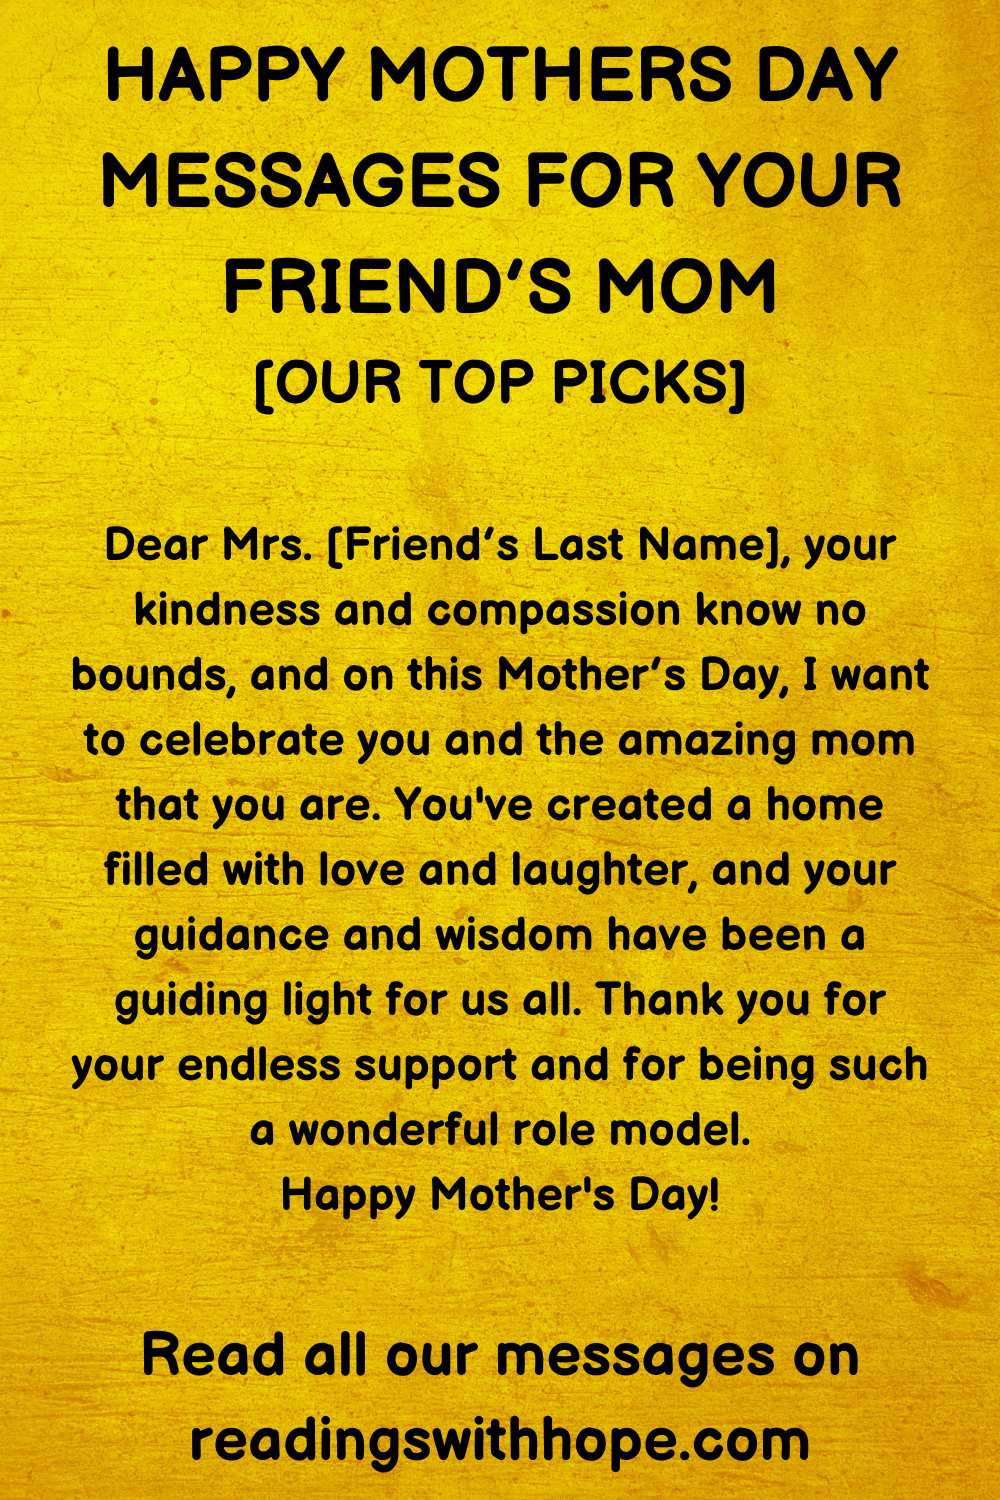 Happy Mothers Day Messages for Your Friend’s Mom
